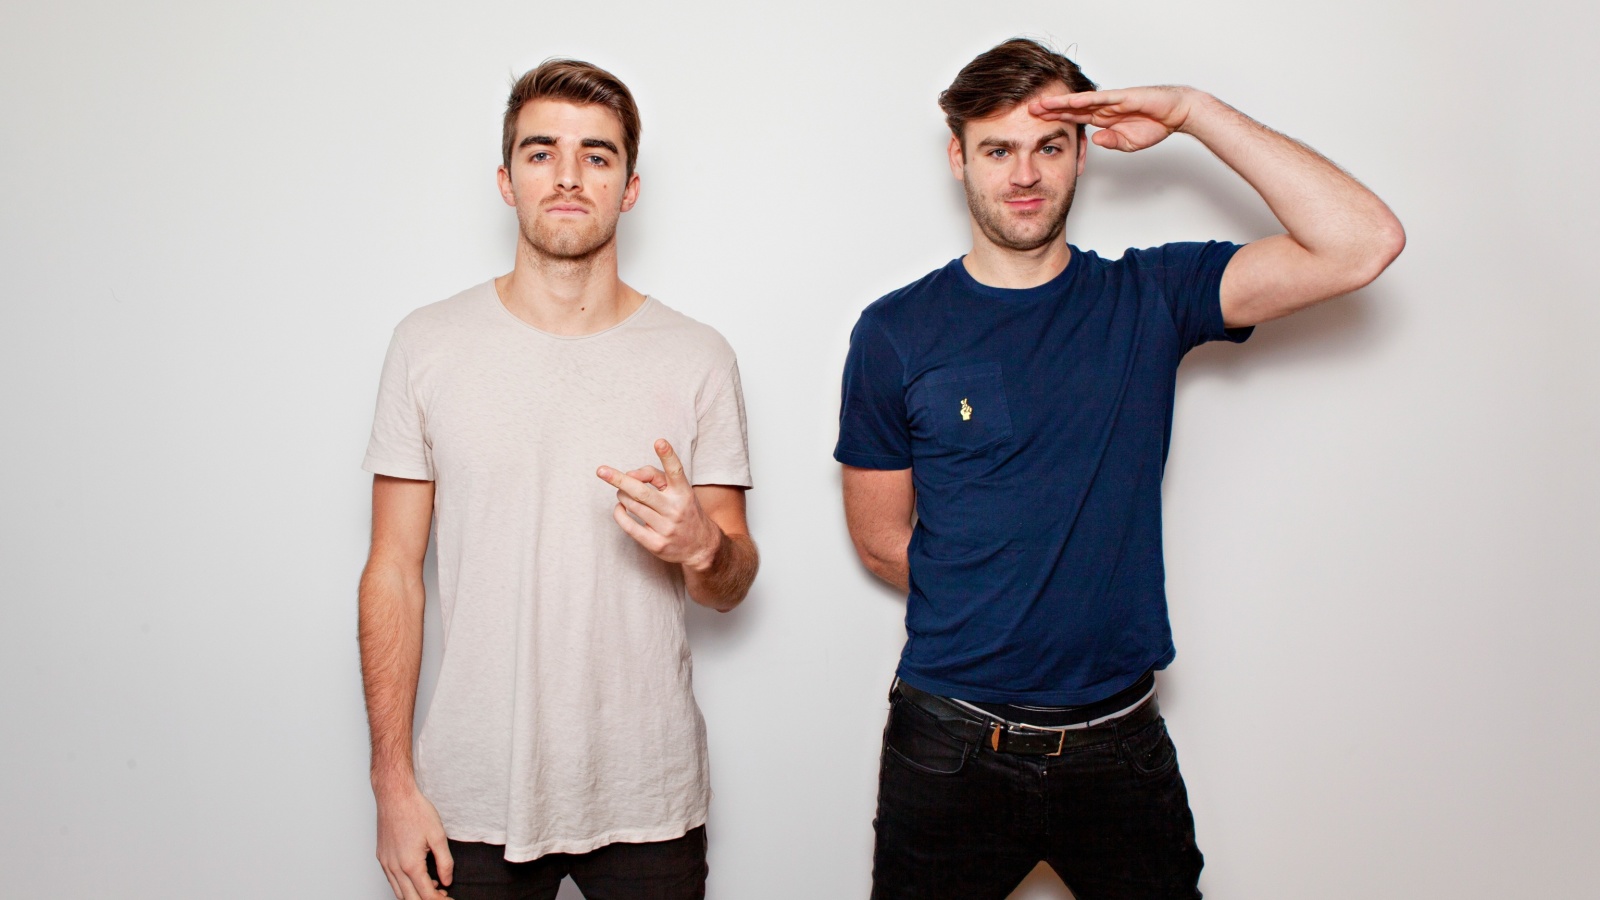 Fondo de pantalla The Chainsmokers with Andrew Taggart and Alex Pall 1600x900